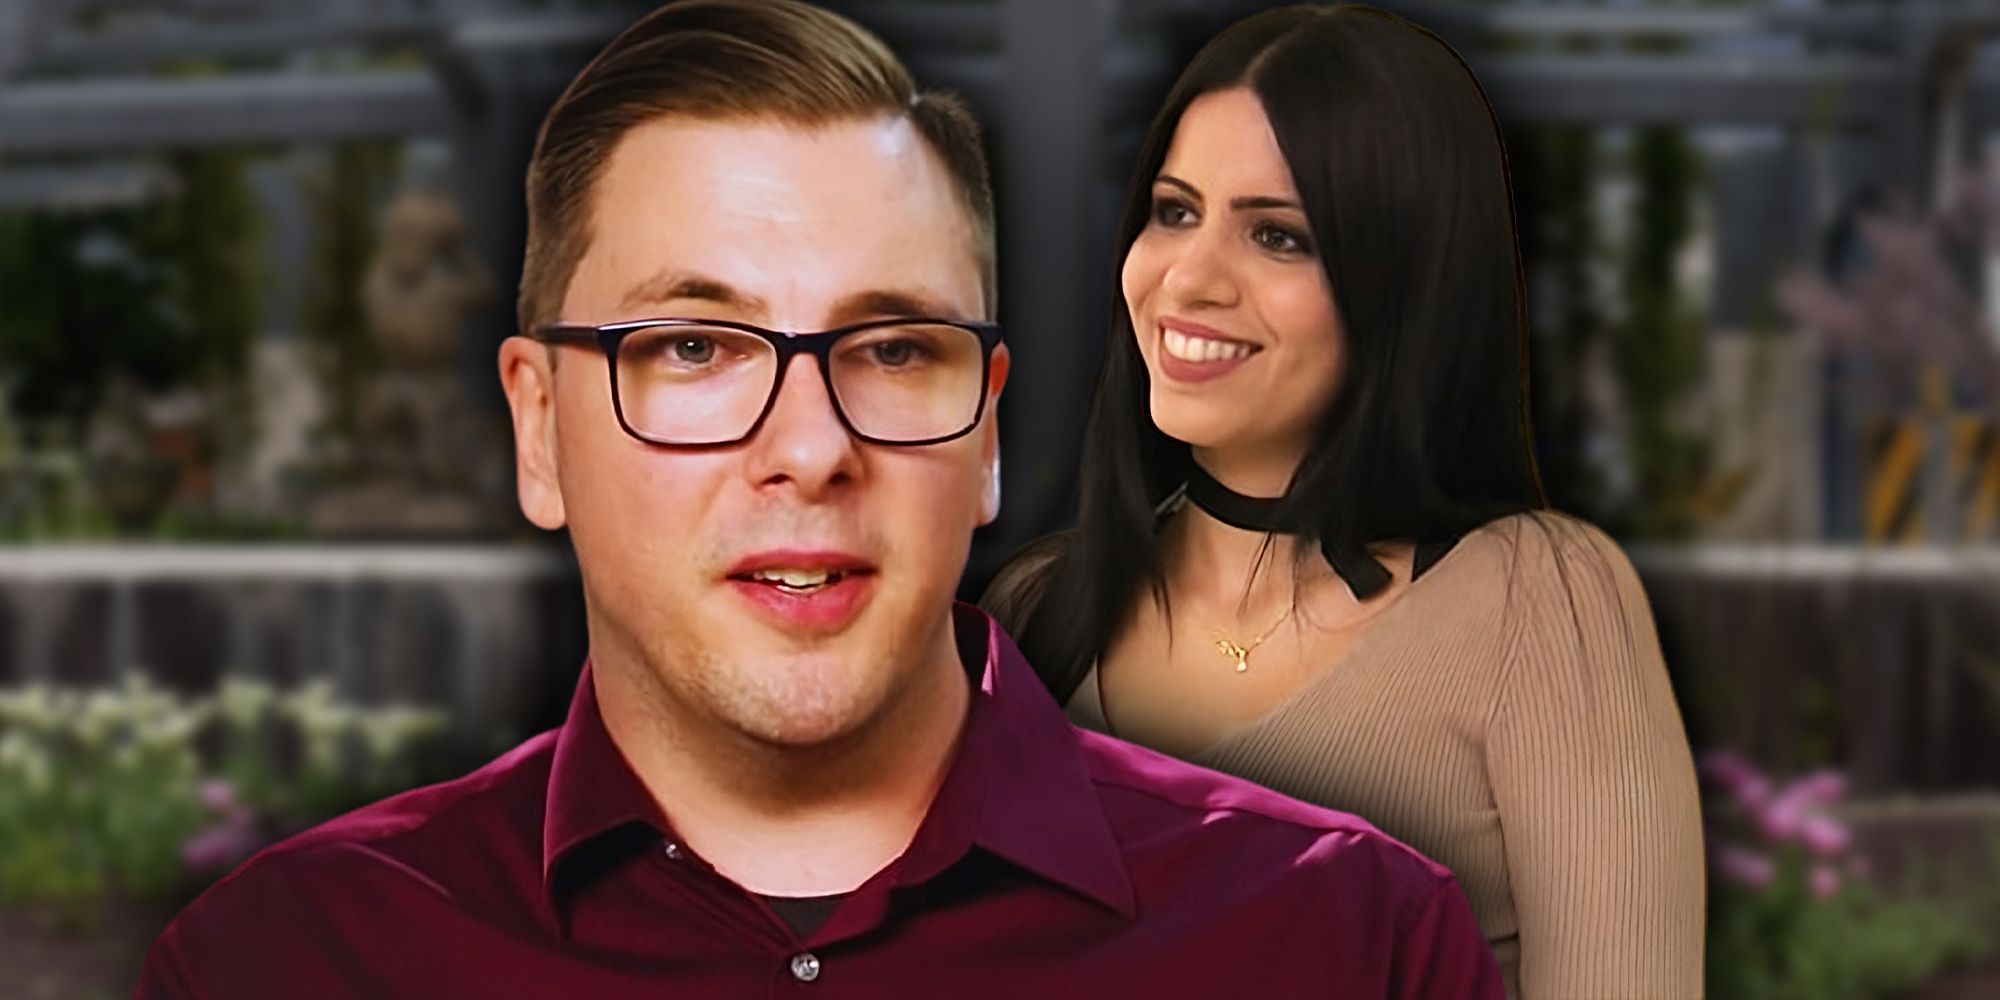 Colt Johnson and Larissa Lima from 90 Day Fiancé montage colt in burgundy larissa in beige